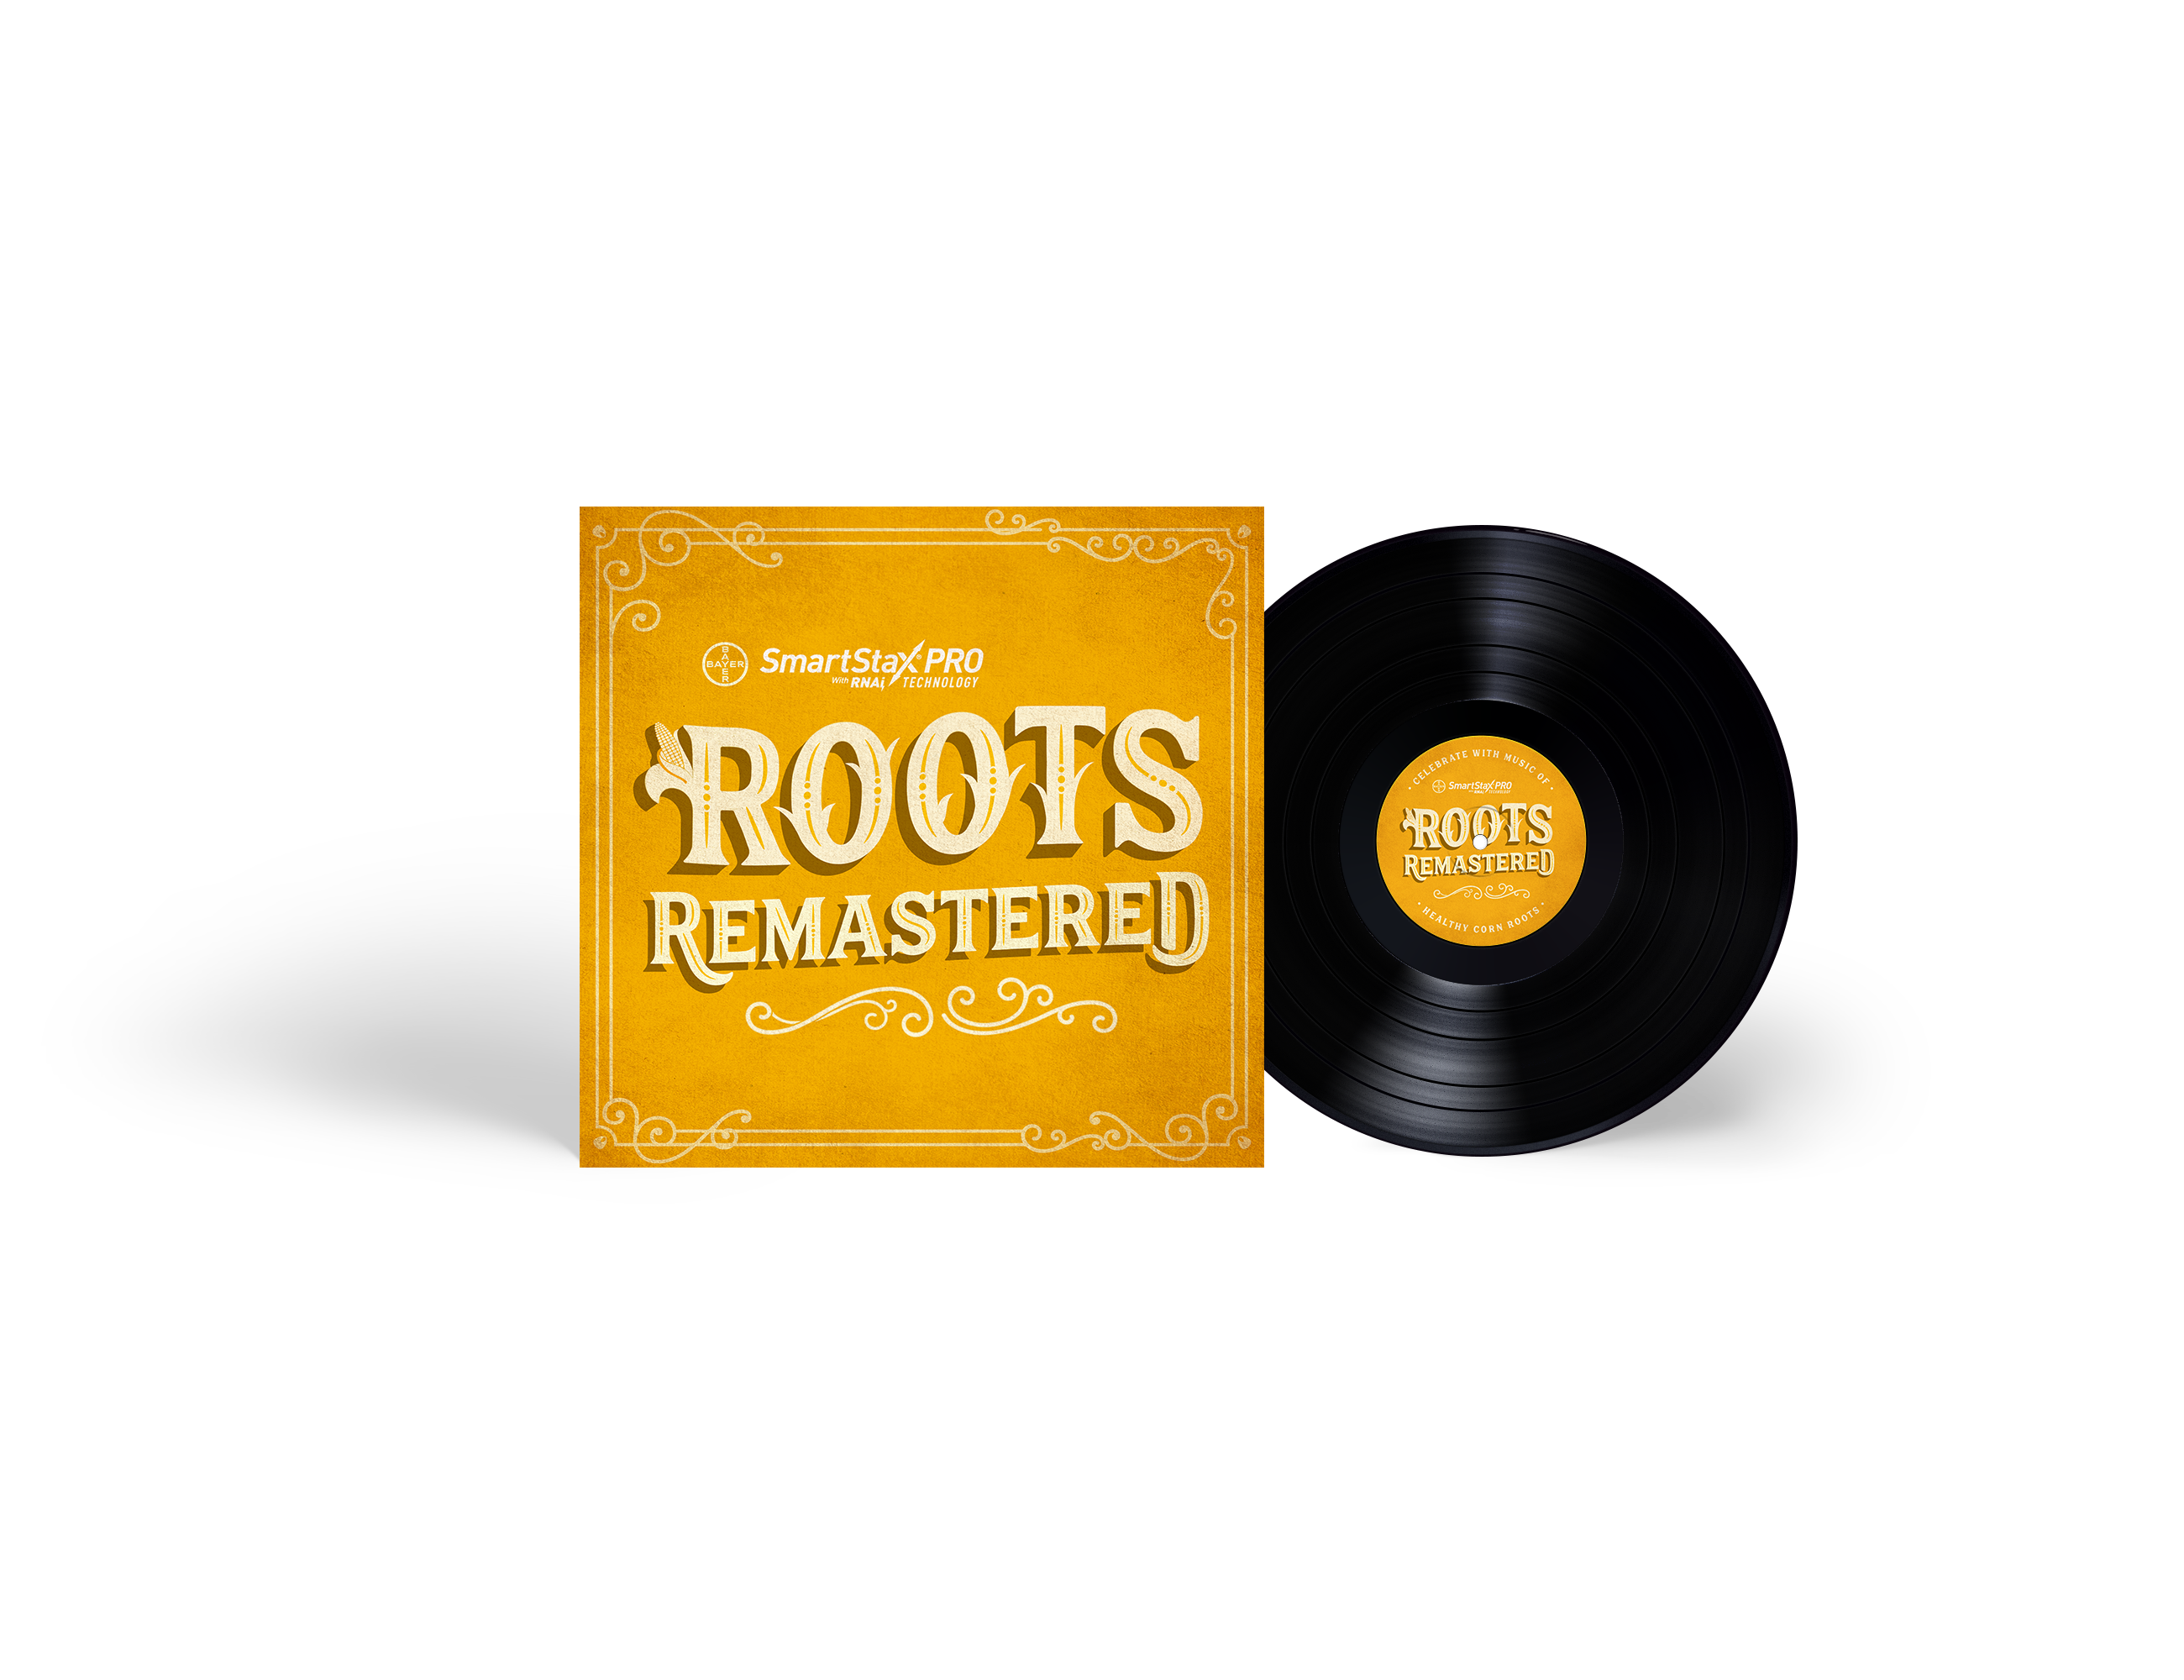 Roots Remastered Vinyl and Vinyl Cover